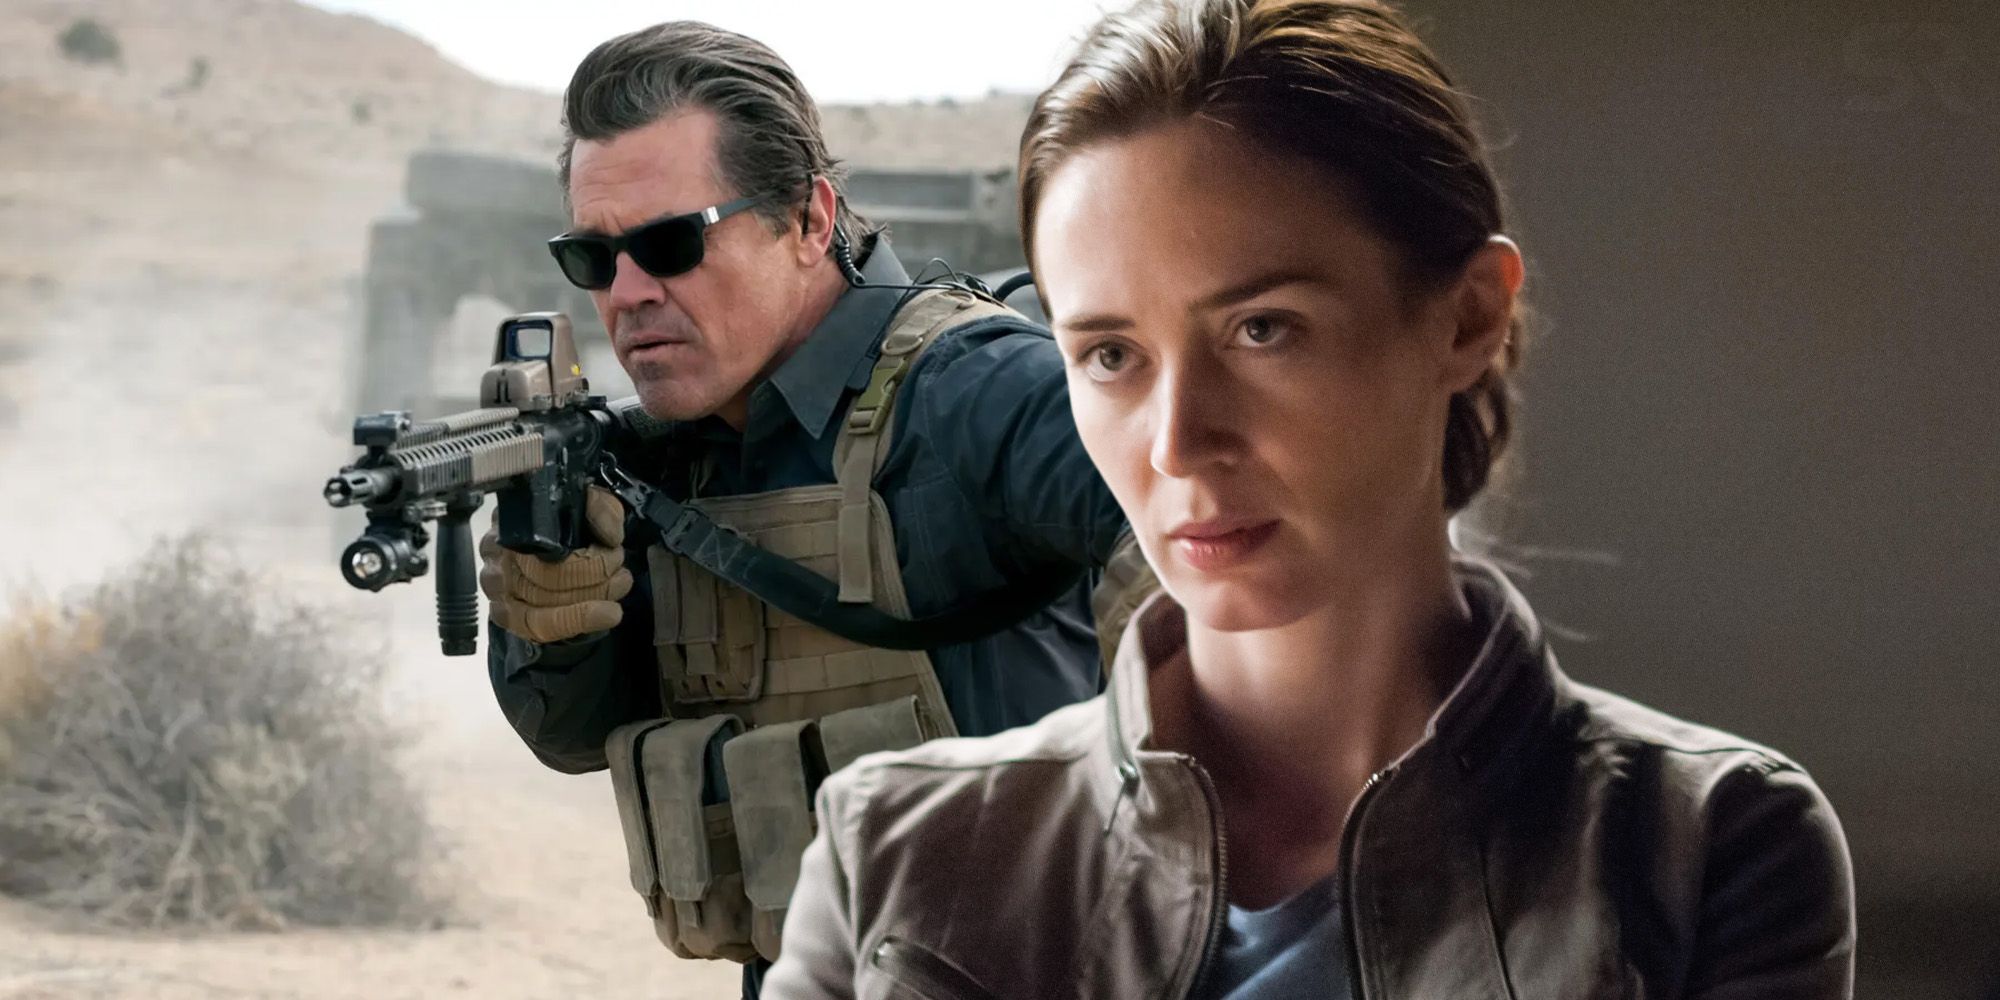 Sicario 3 Needs To Bring Back What Made The First Movie So Great